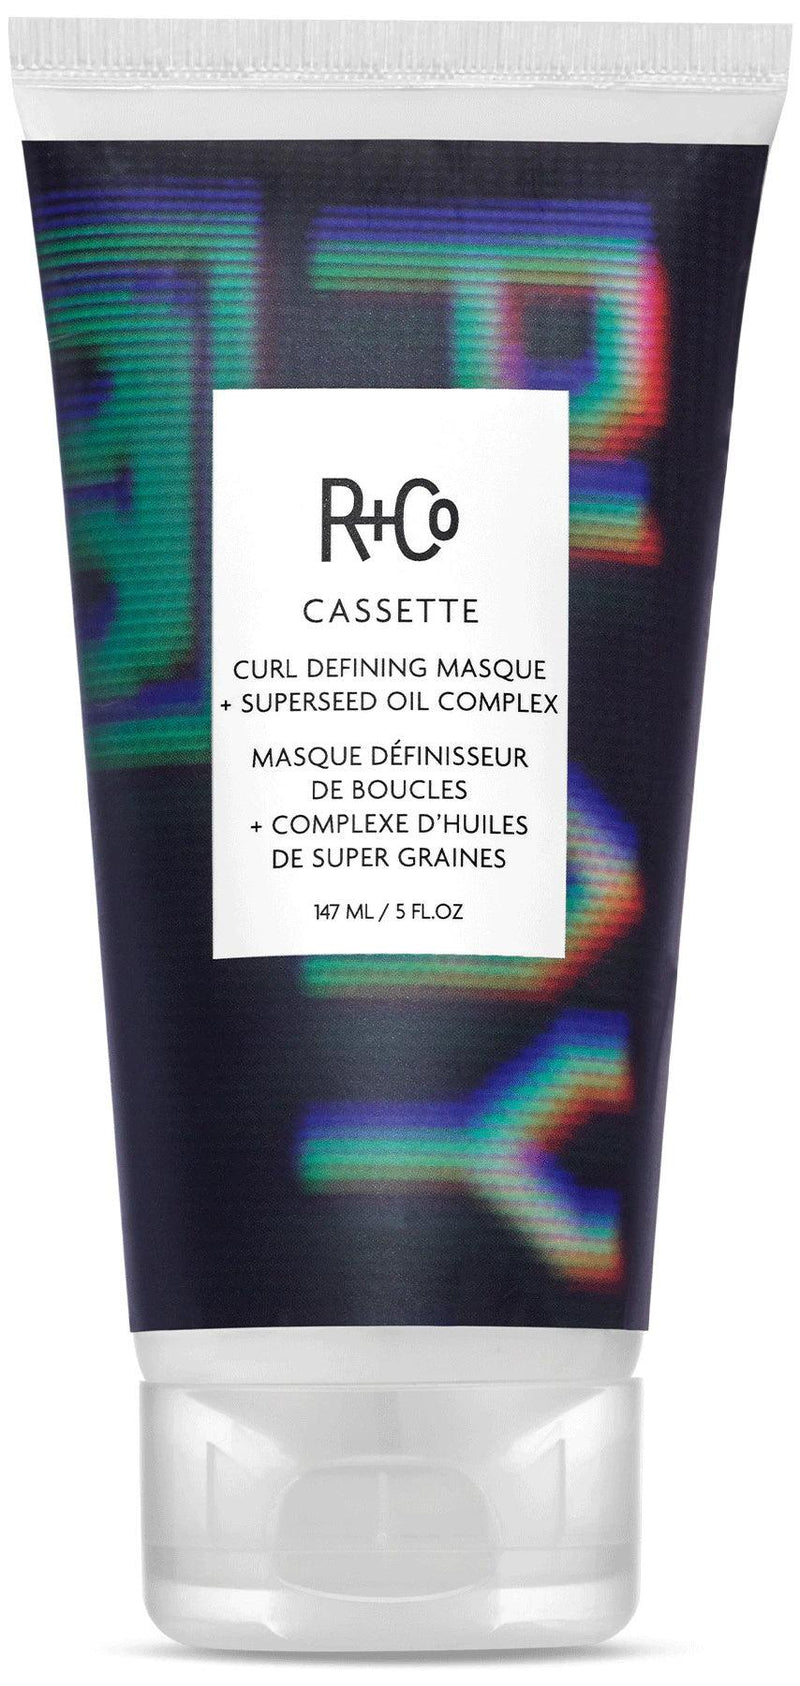 R+CO Cassette Curl Defining Masque + Superseed Oil Complex